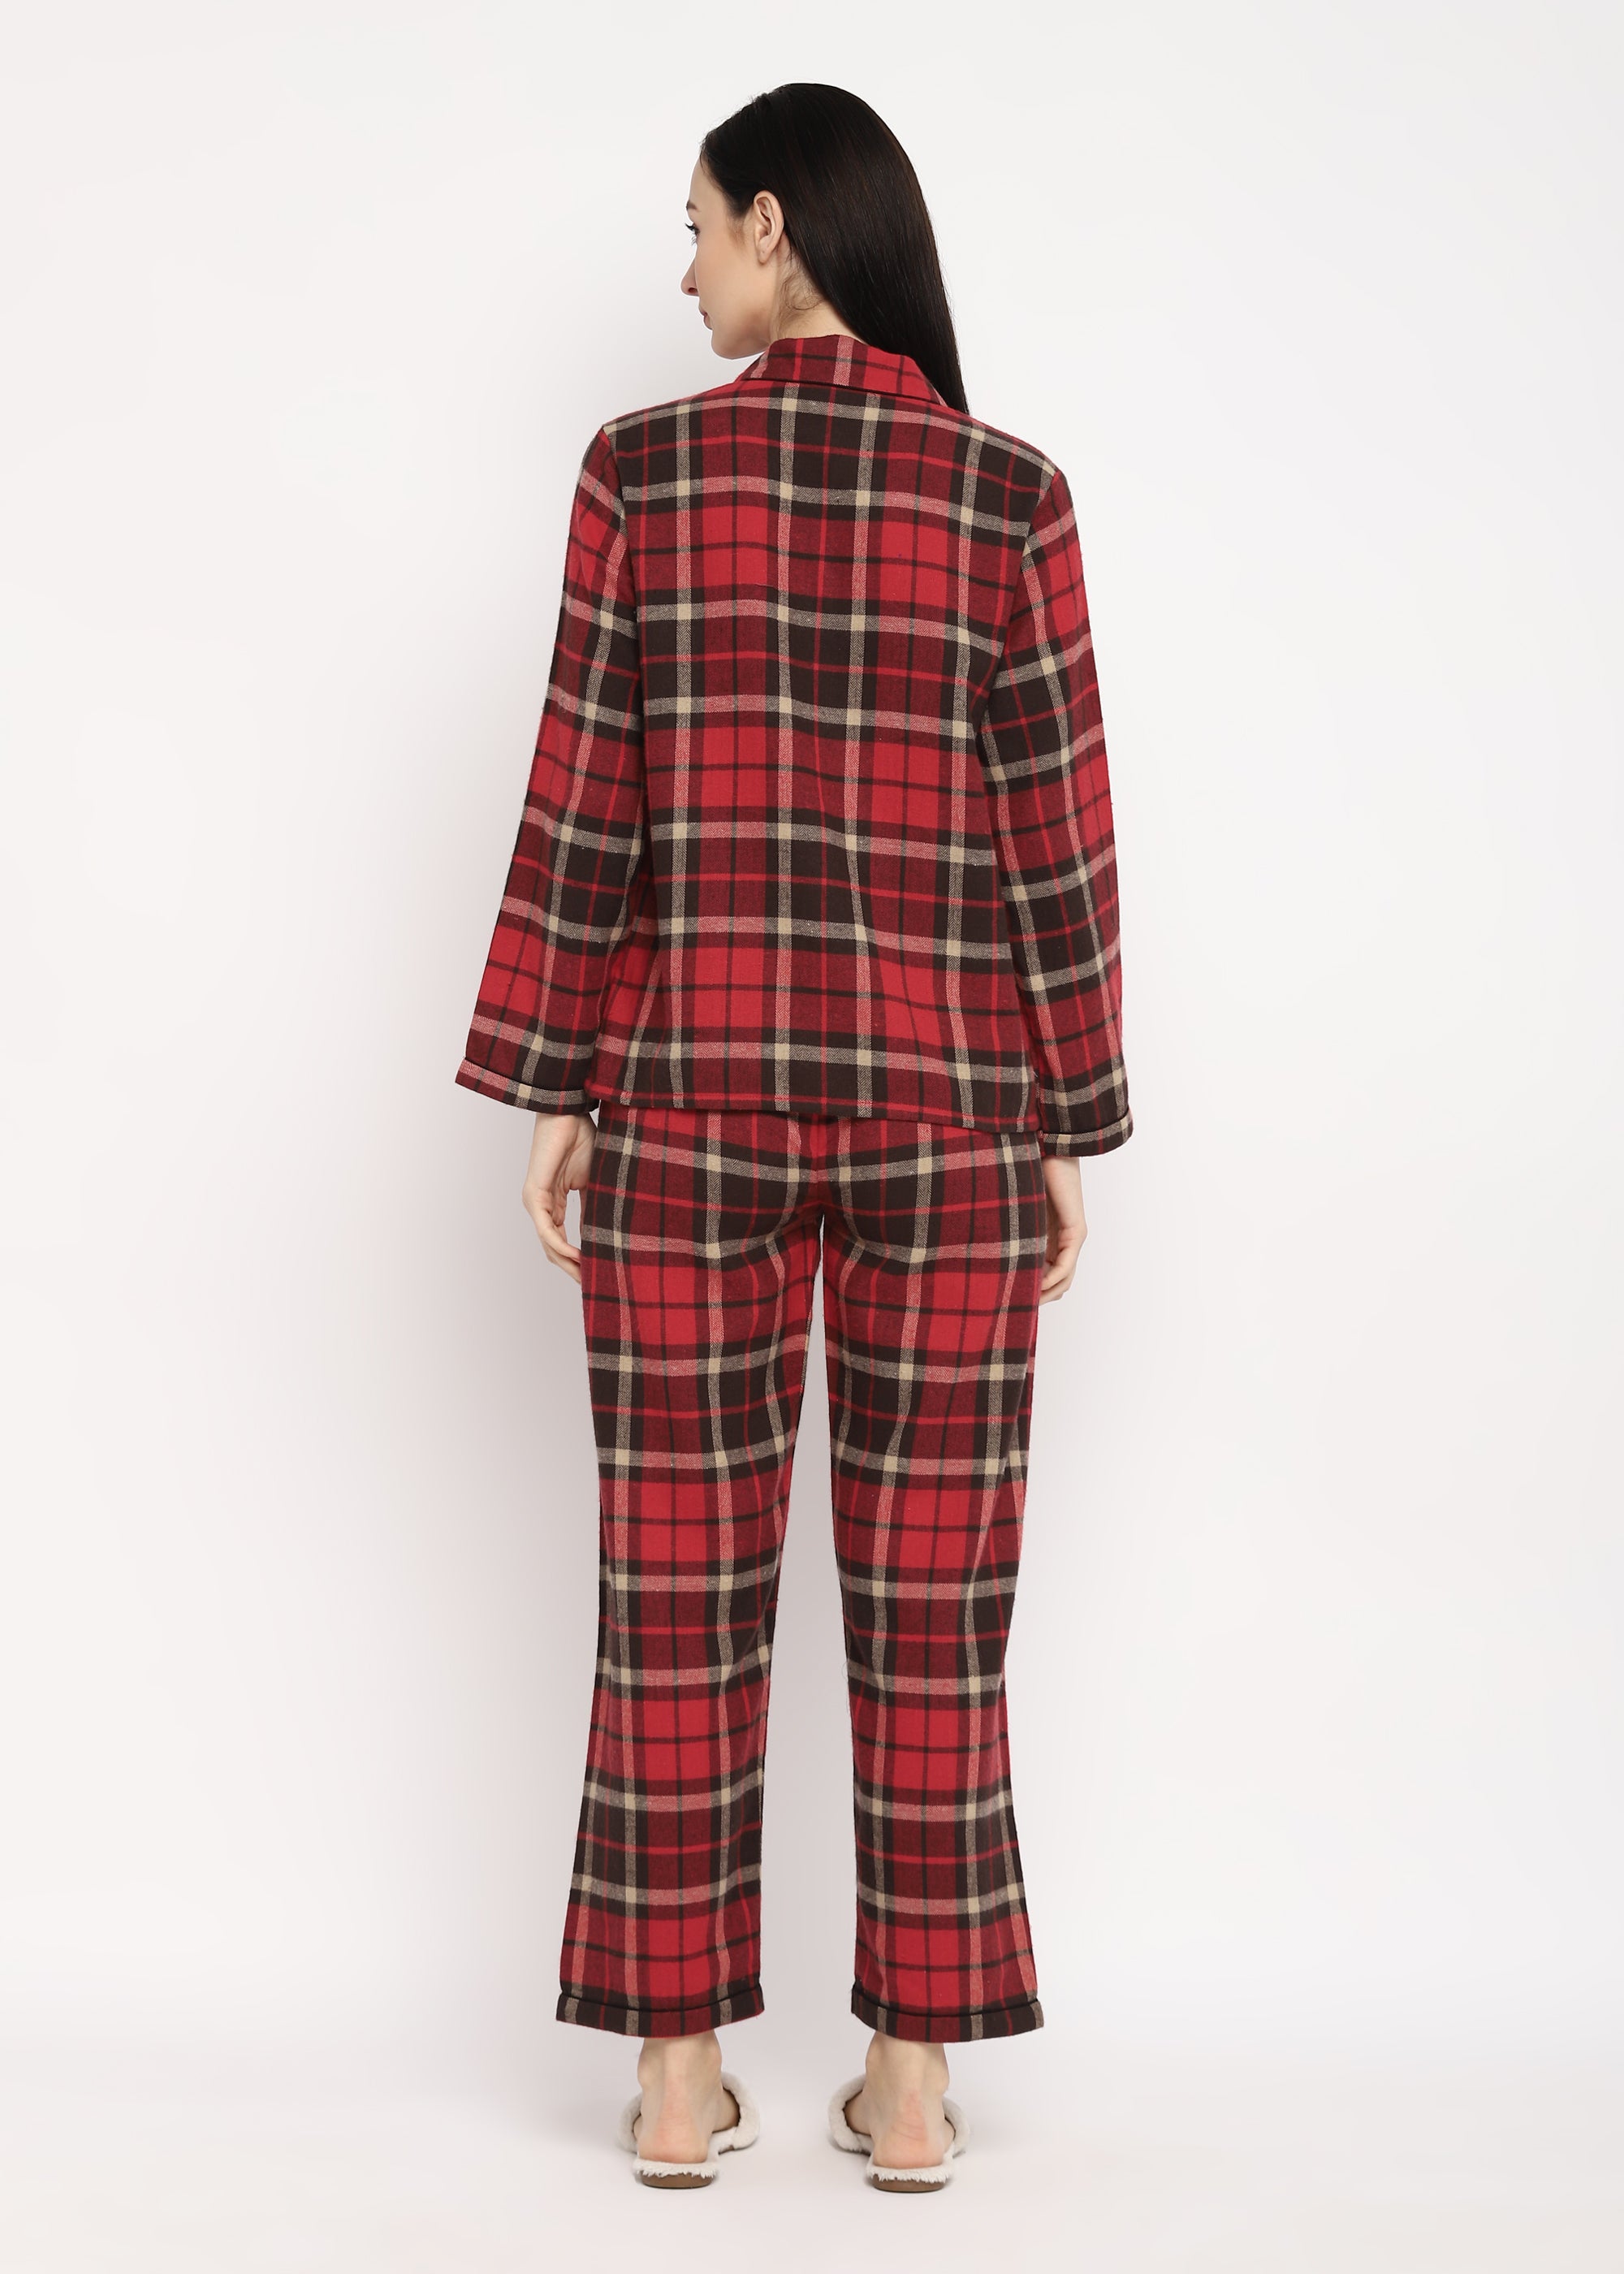 Brown & Grey Checked Print Cotton Flannel Long Sleeve Women's Night Suit - Shopbloom